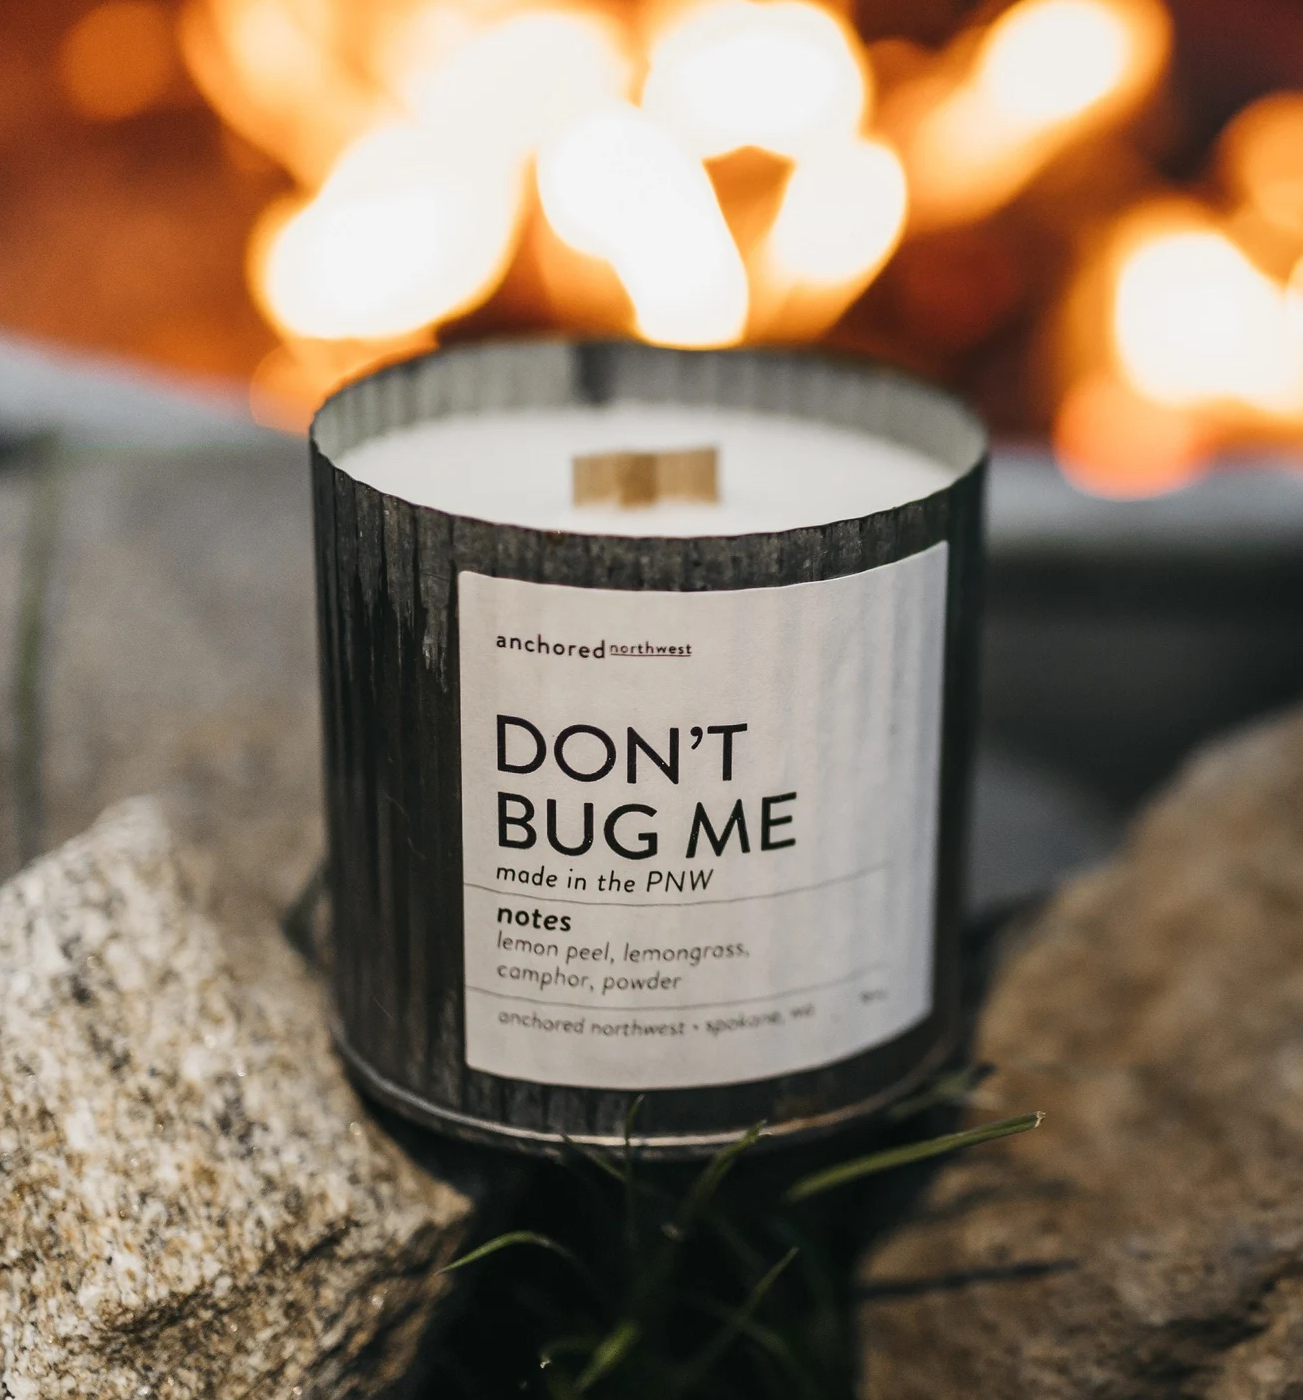 the don't bug me candle